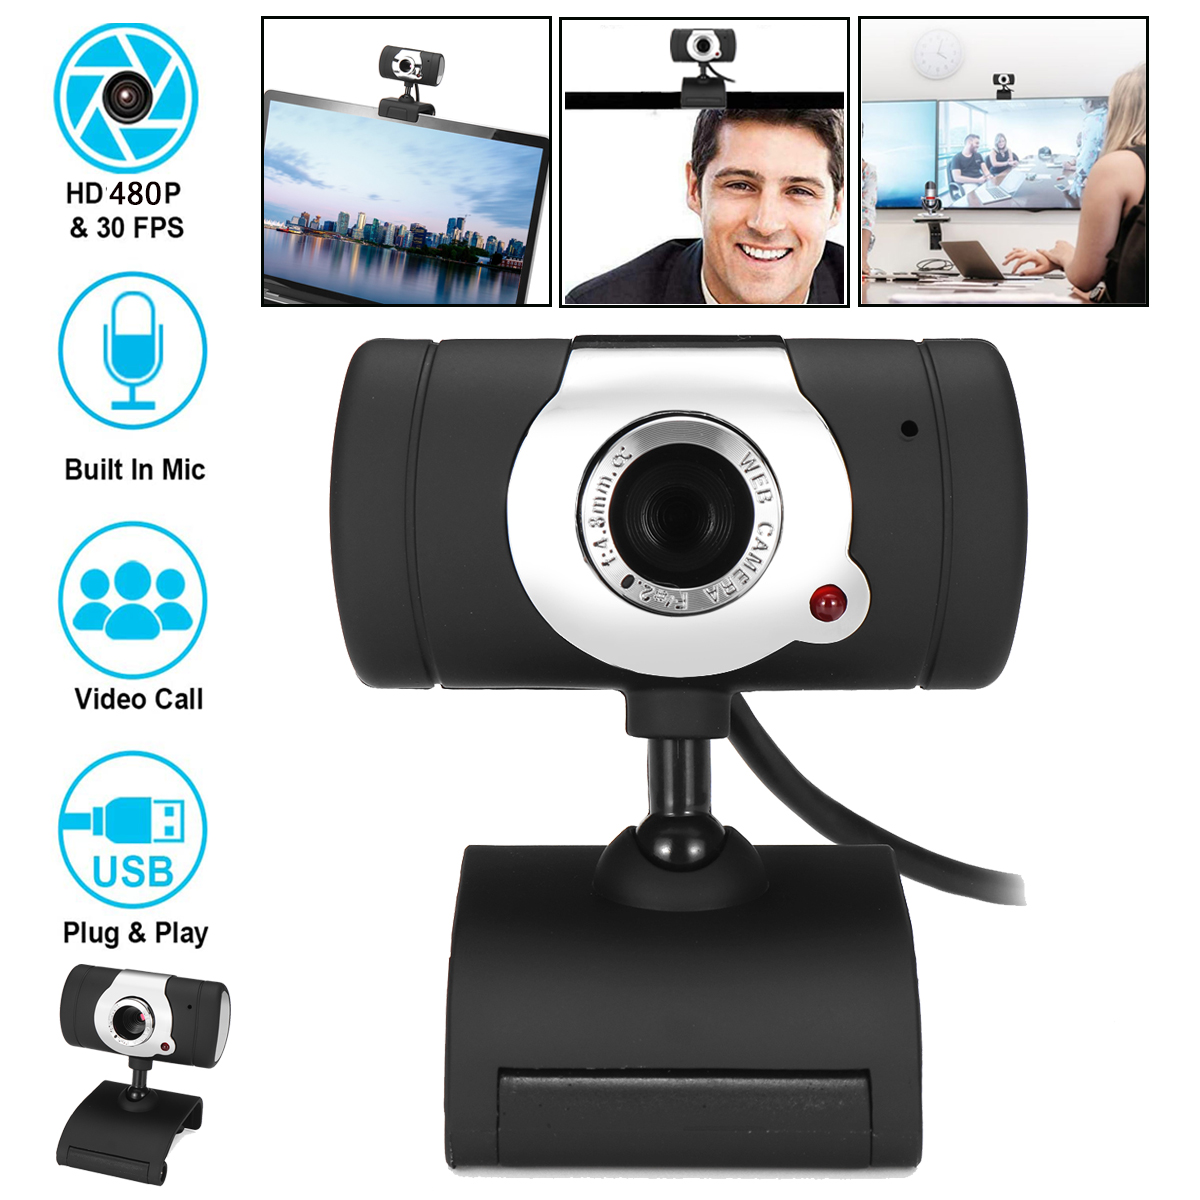 480P-Webcam-with-Microphone-Web-Camera-PC-Camera-for-Computer-Skype-Video-Chat-Recording-Compatible--1972781-1